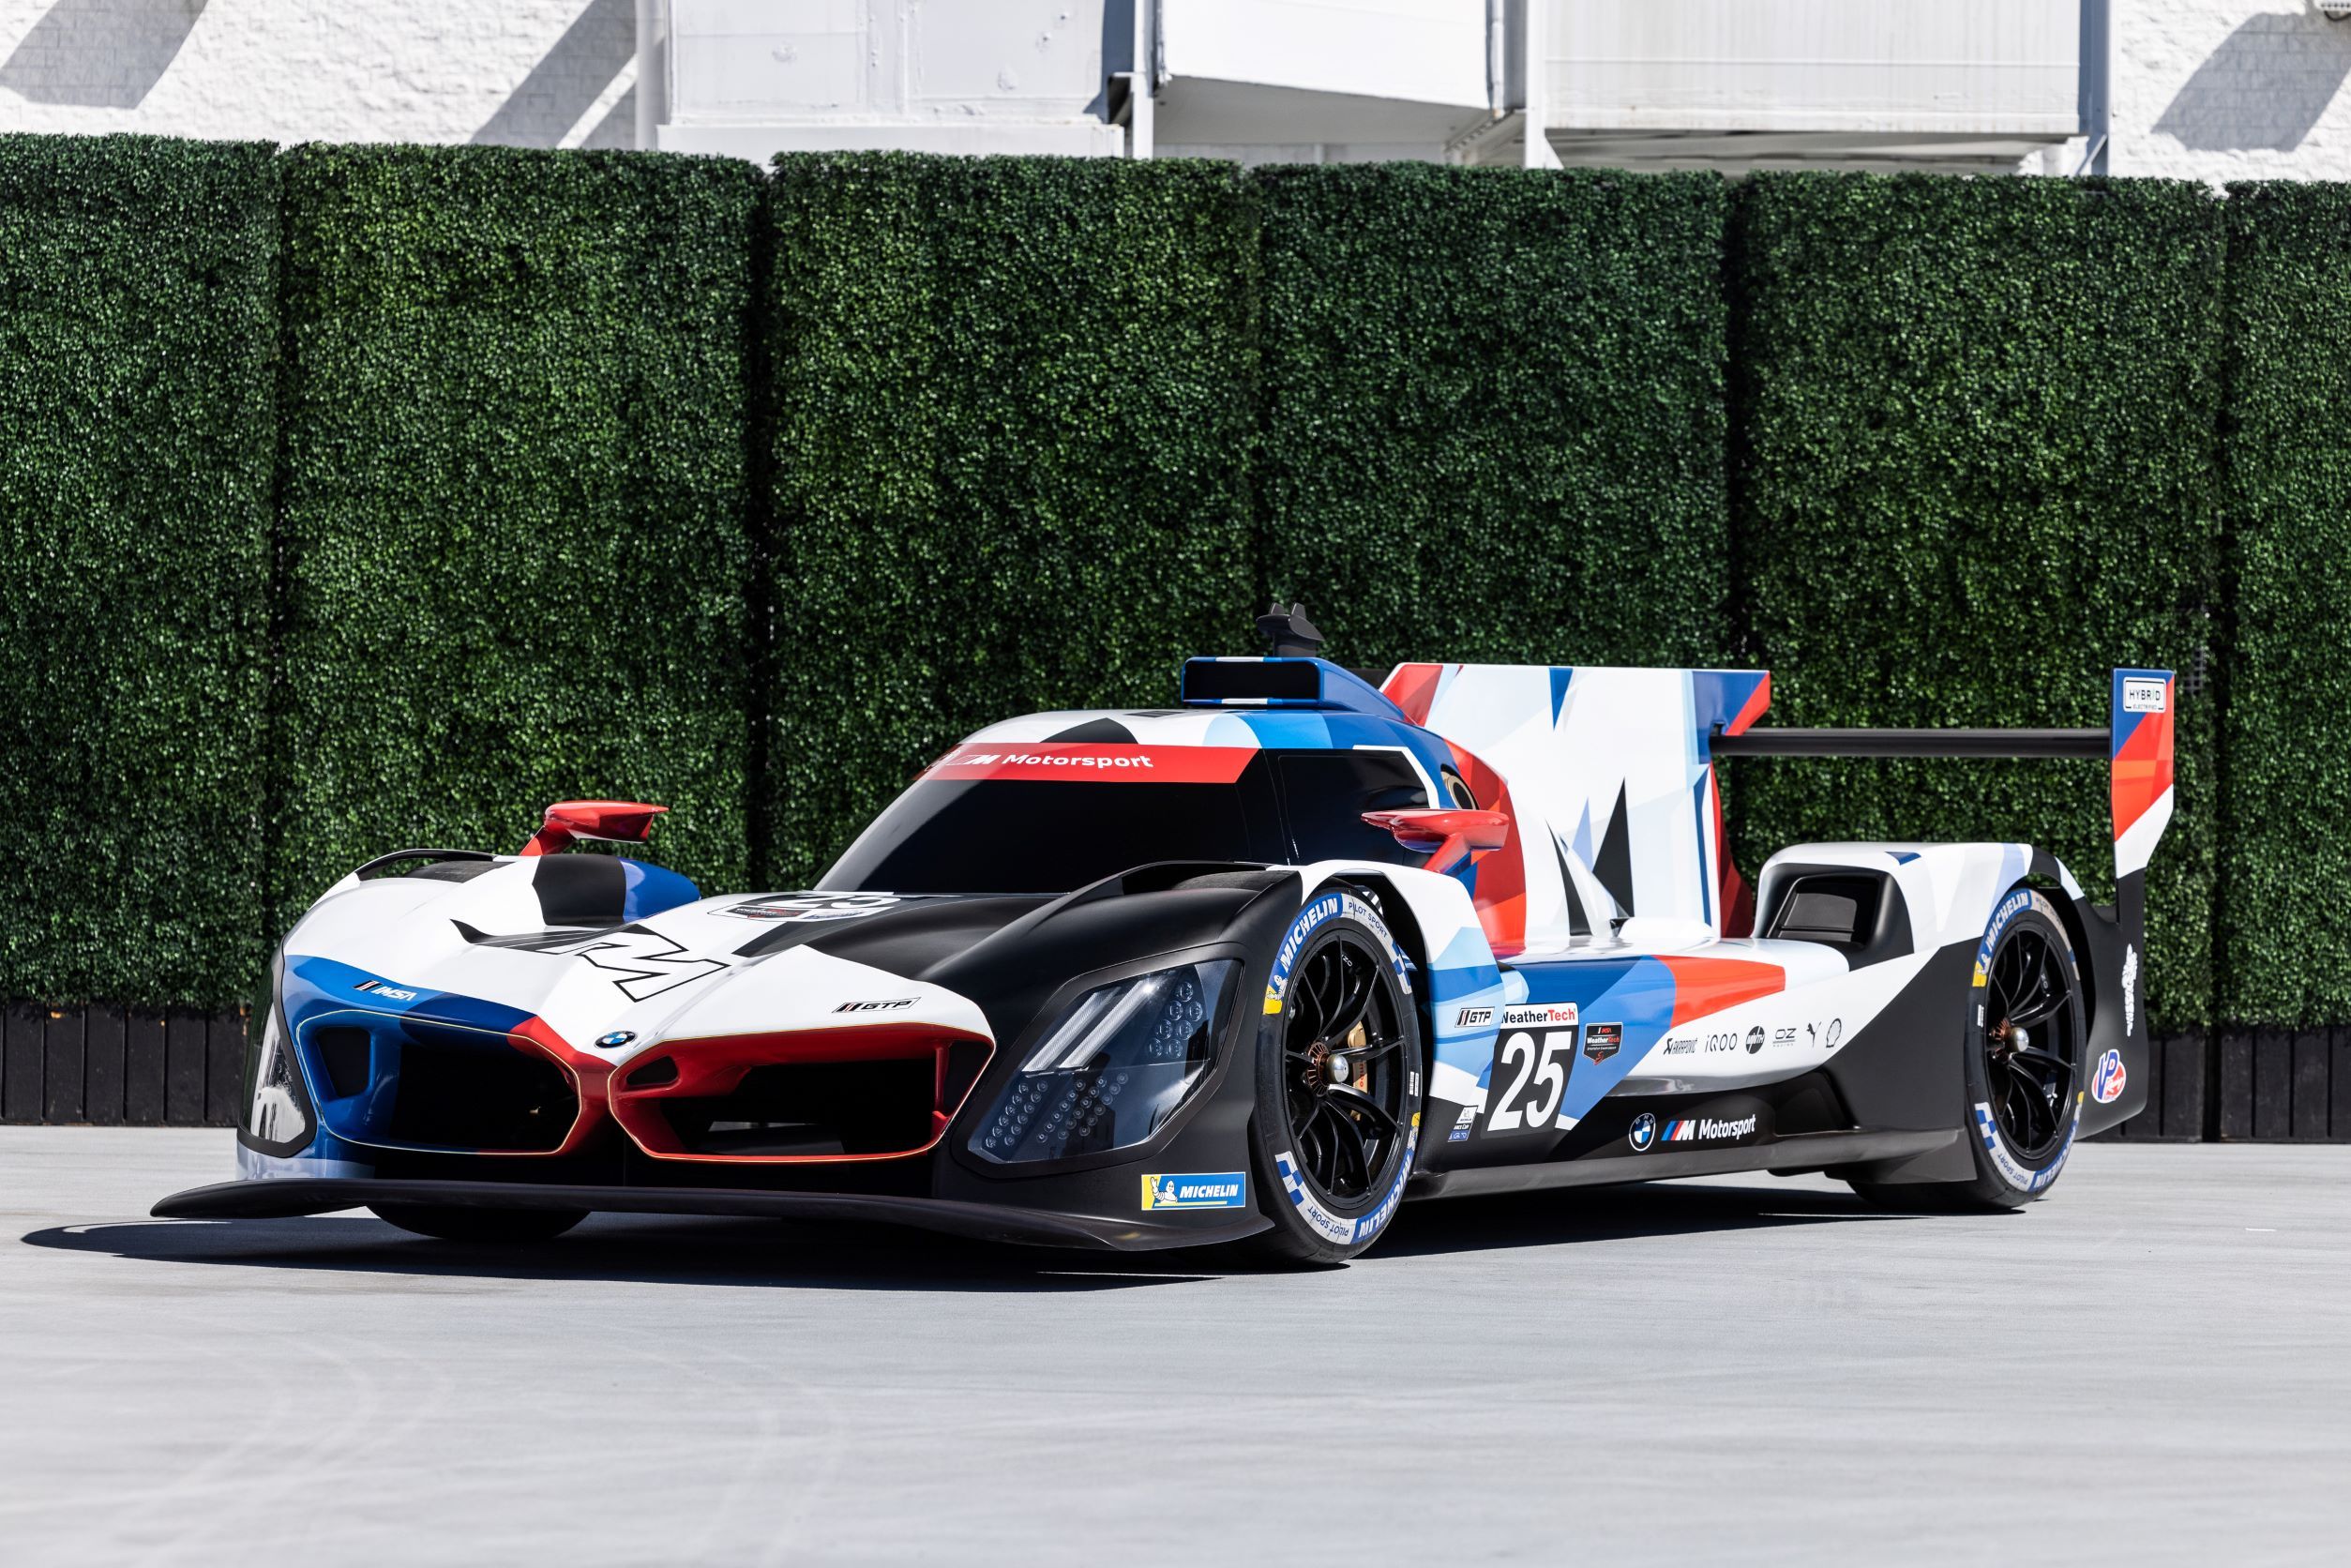 Who will race in WEC and IMSA with LMDh/LMH cars in 2023?